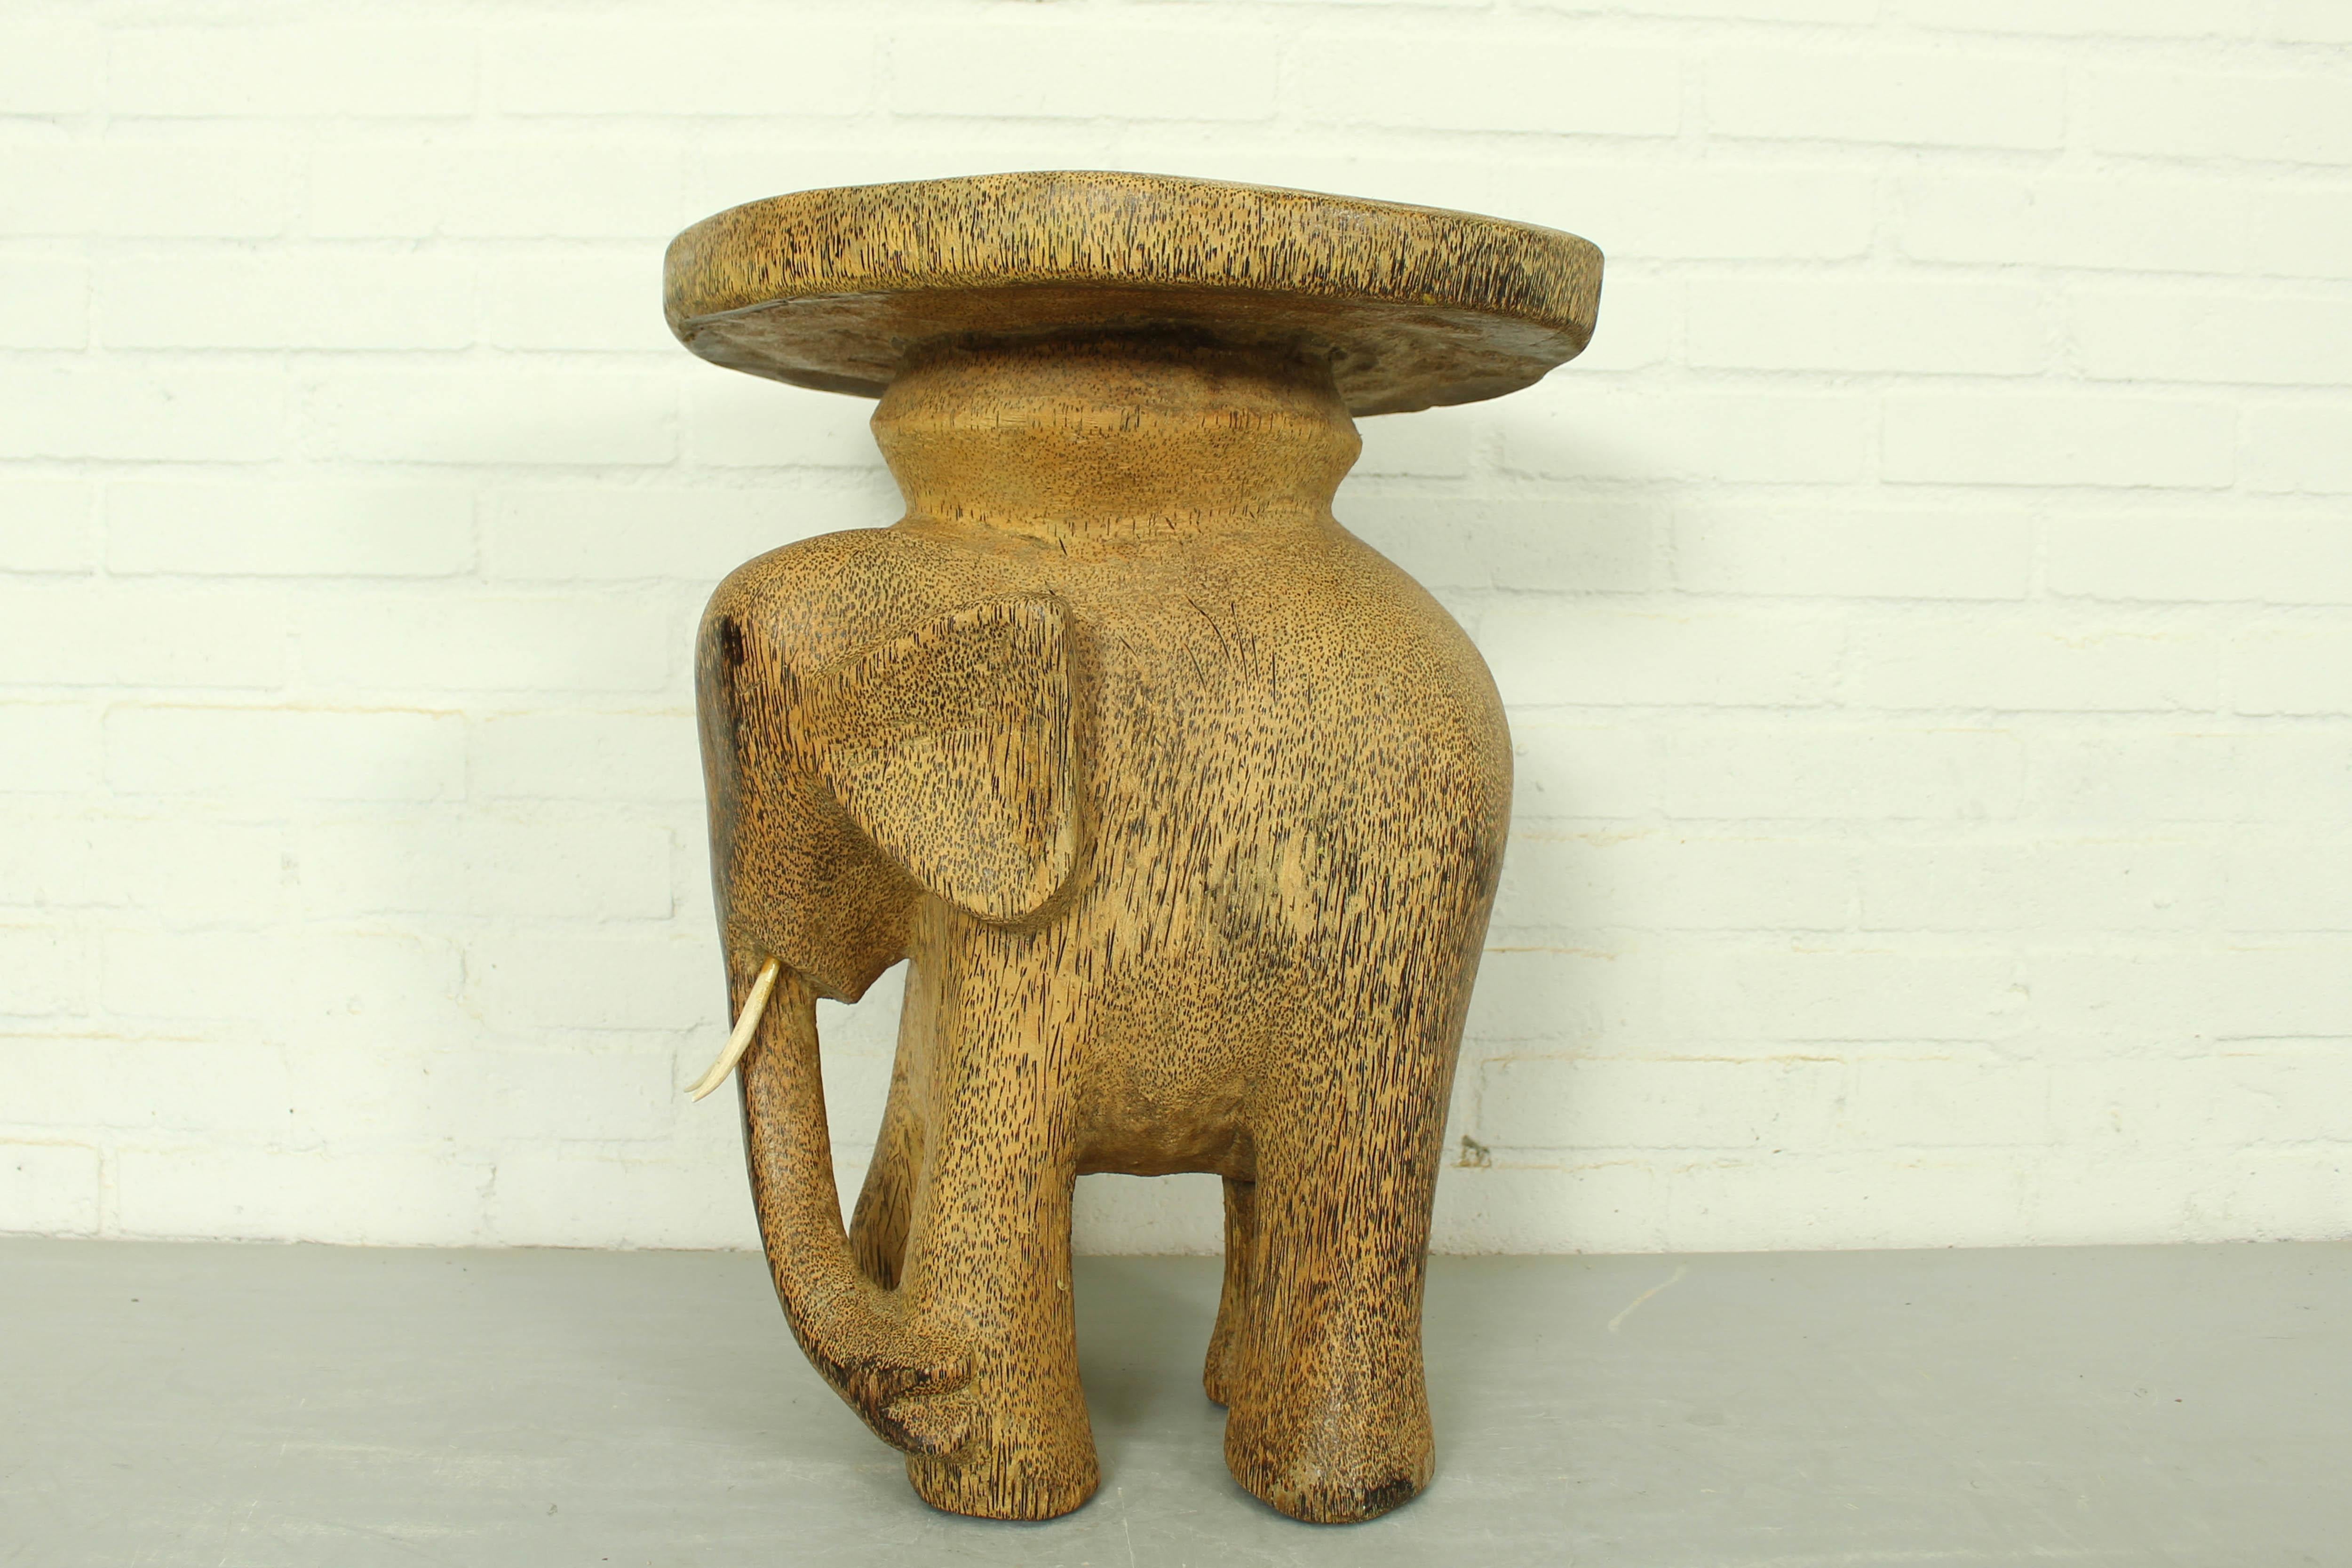 Vintage Elephant Sidetable Stool Plant Stand in Palmwood, 1960s For Sale 3